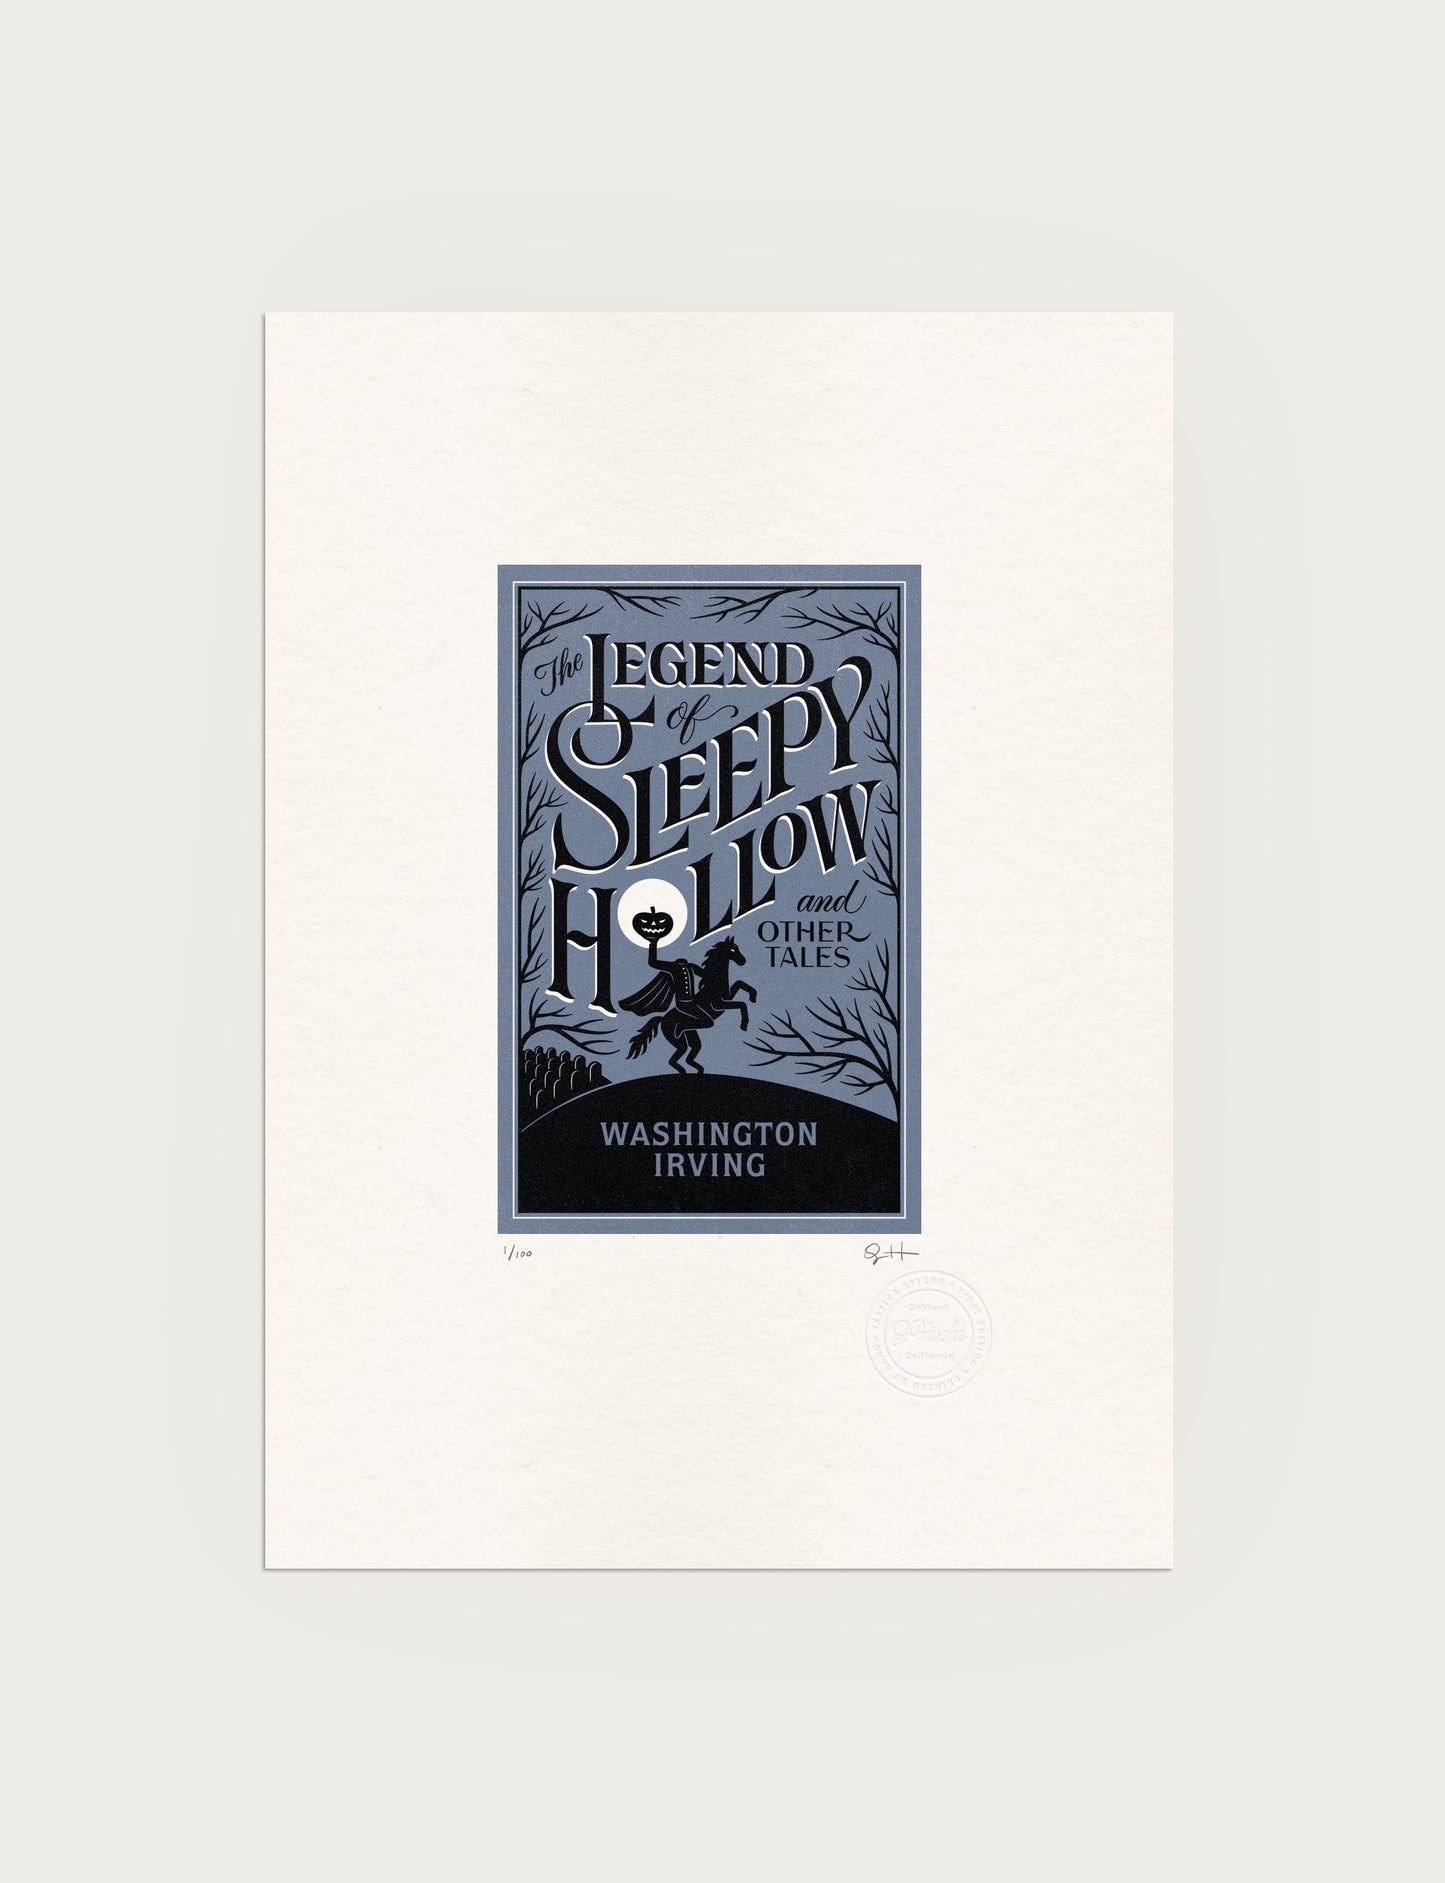 2-color letterpress print in blue and black. Printed artwork is an illustrated book cover of The Legend of Sleepy Hollow including custom hand lettering.